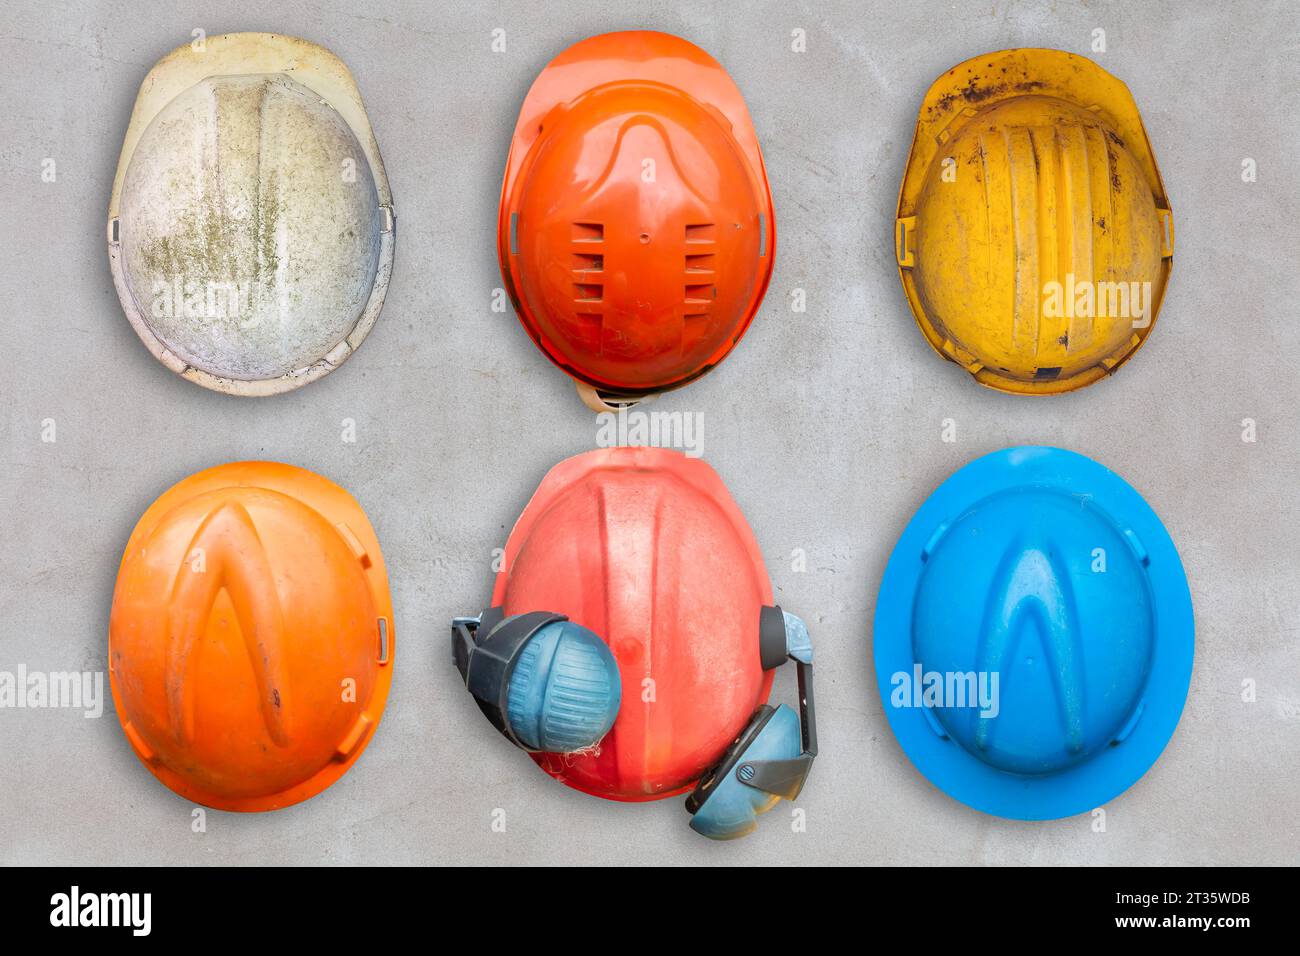 Six colorful old and worn construction helmets hanging on a concrete wall Stock Photo